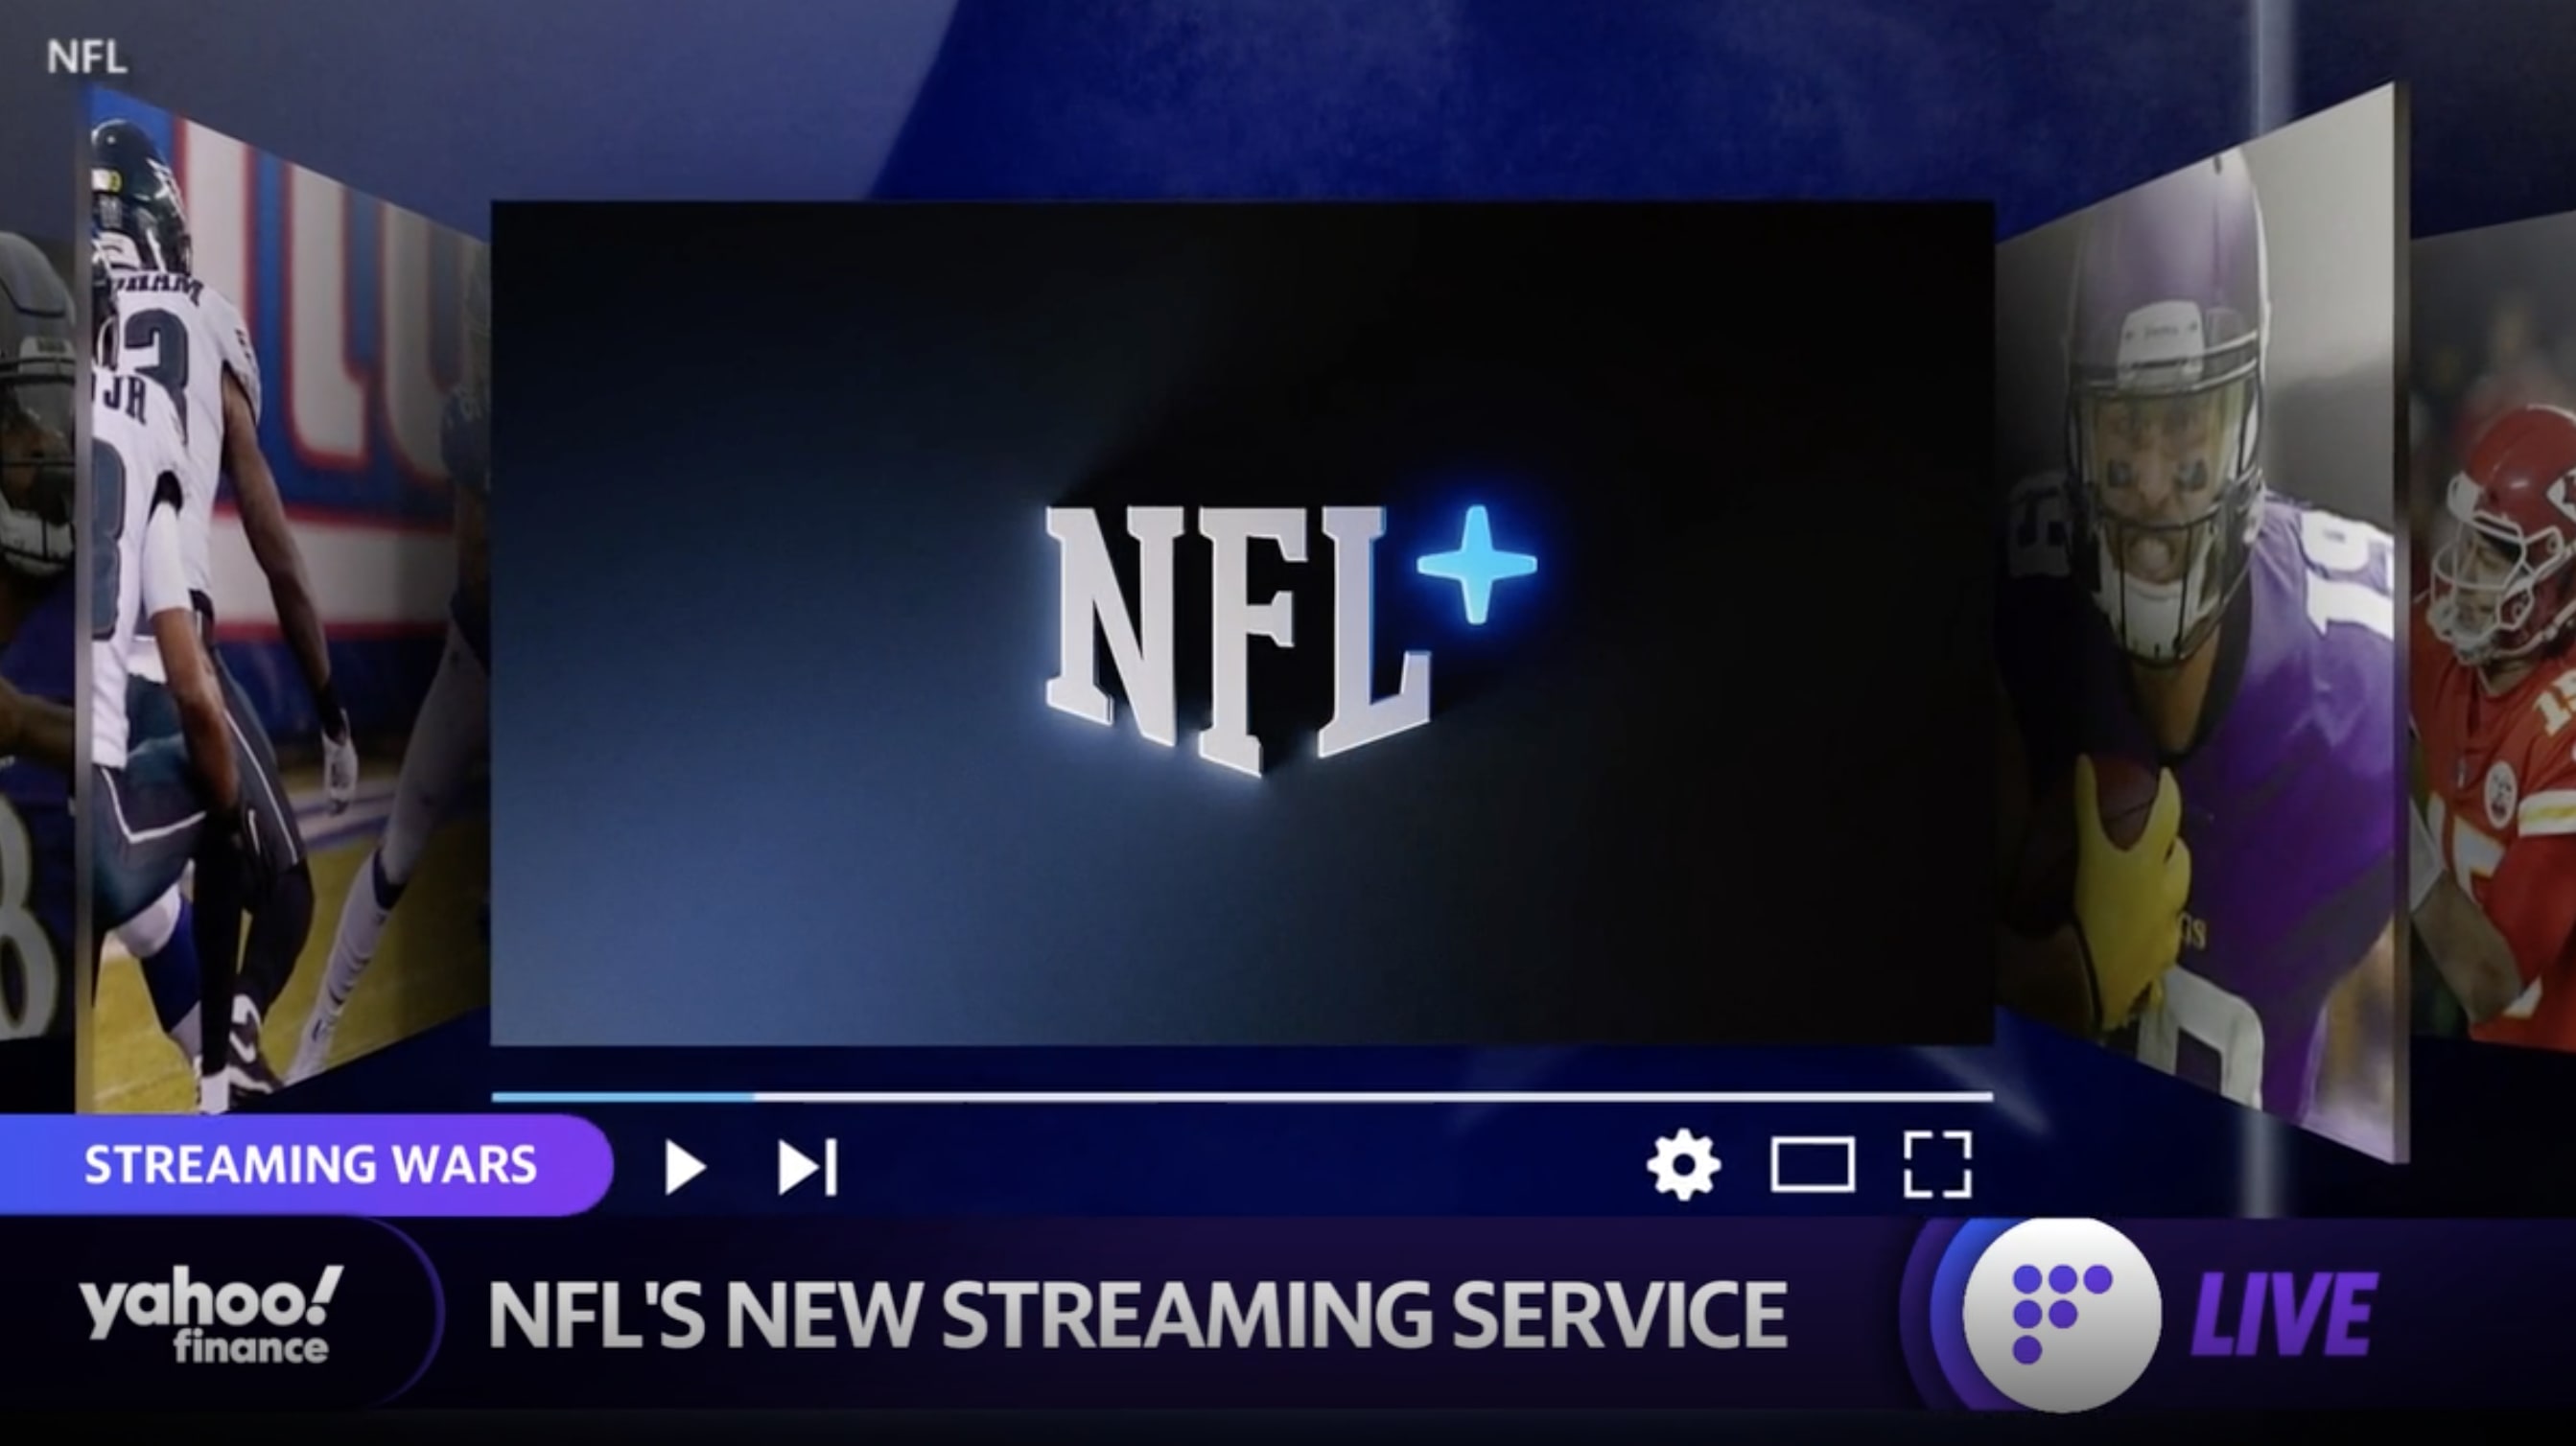 NFL Launches New Streaming Service NFL+ and Kills Game Pass